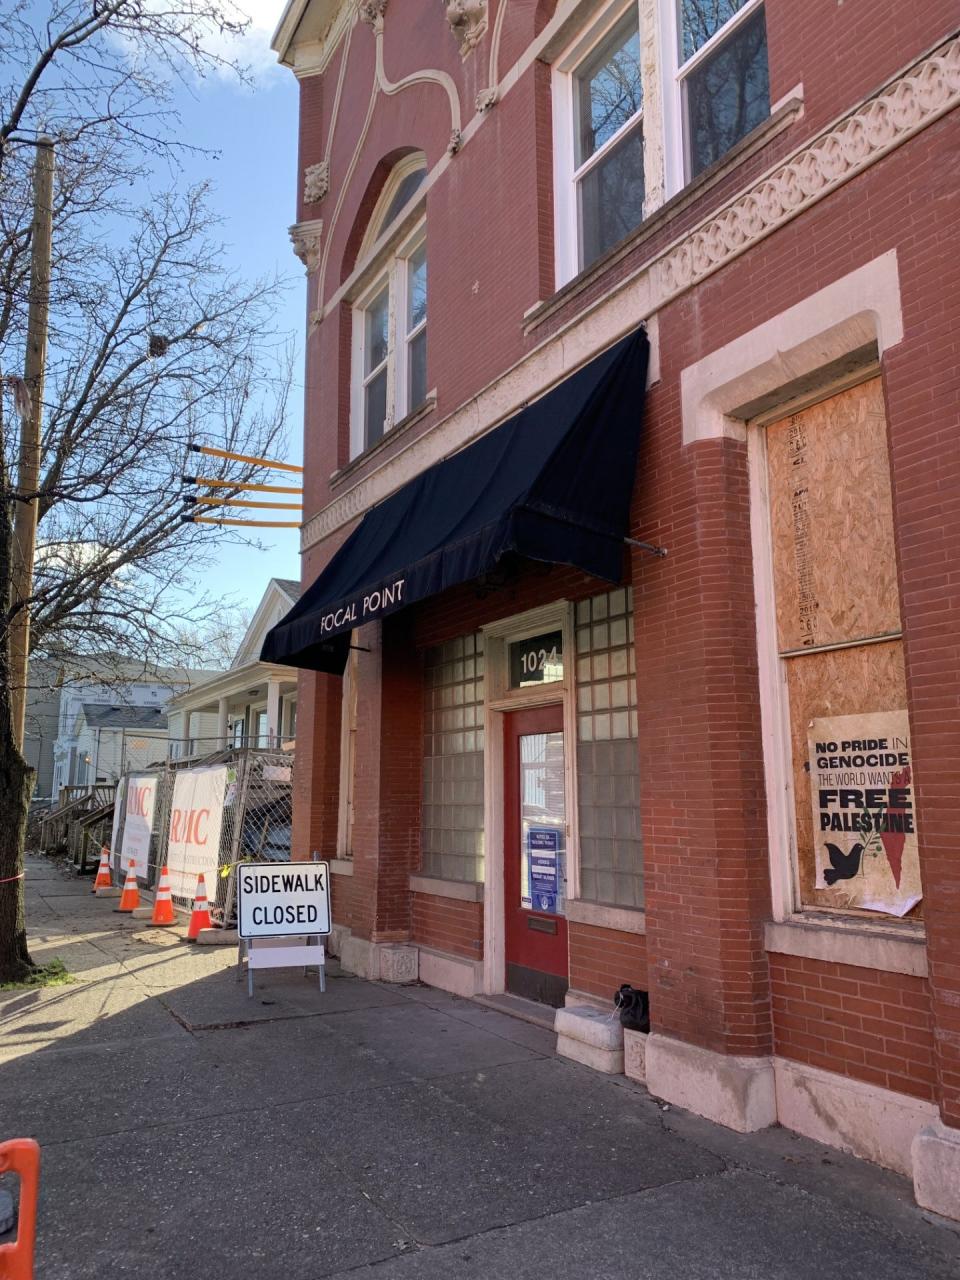 Full plans for the building at 1024 Logan Street aren't yet clear, though permits filed with Louisville Metro Government show interior work is planned to create a conference room and studio space.